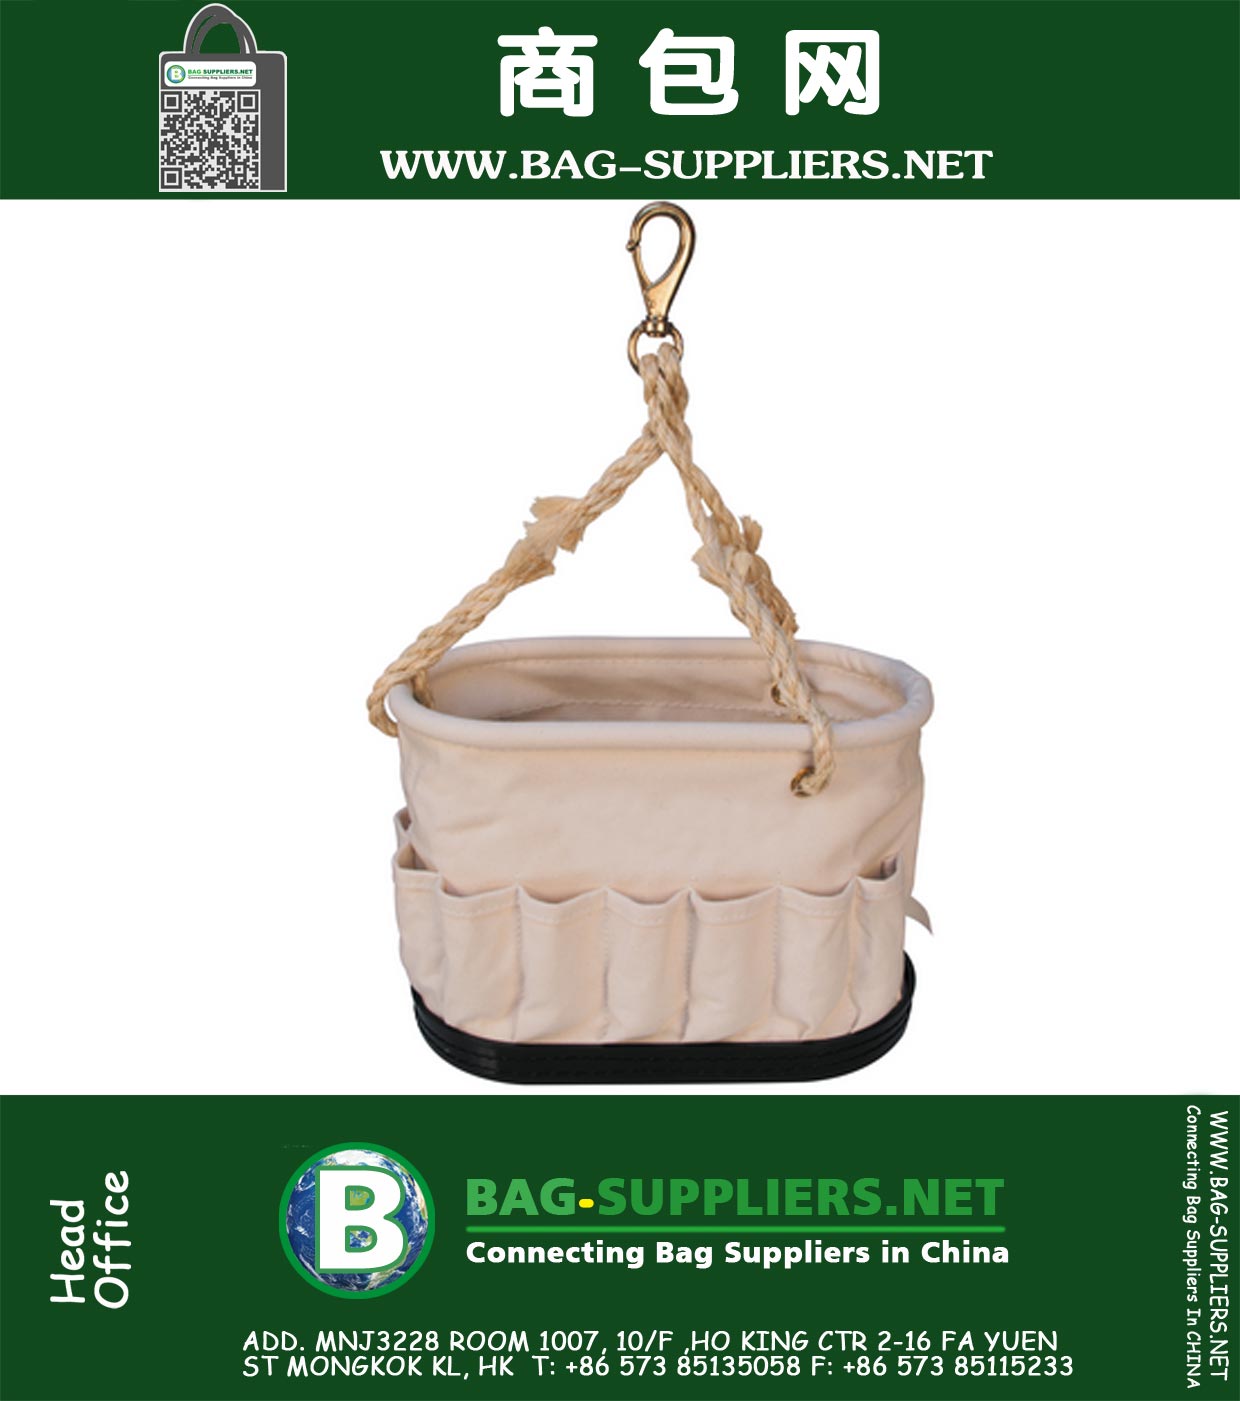 Oval Bucket with 41 Pockets